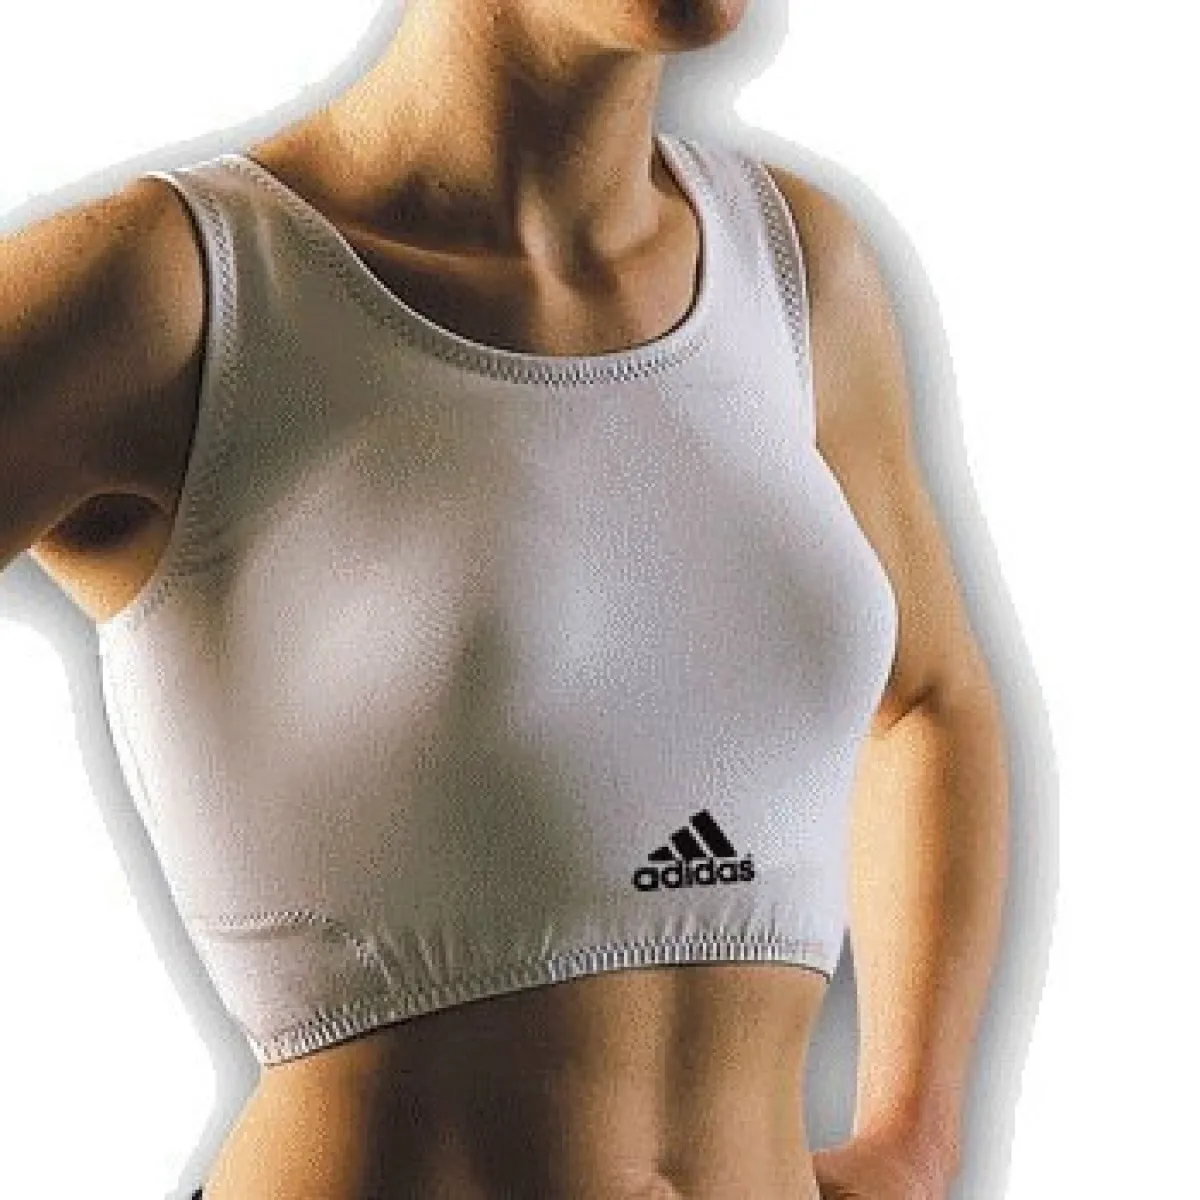 Protège-poitrine adidas pour femmes WKF approved